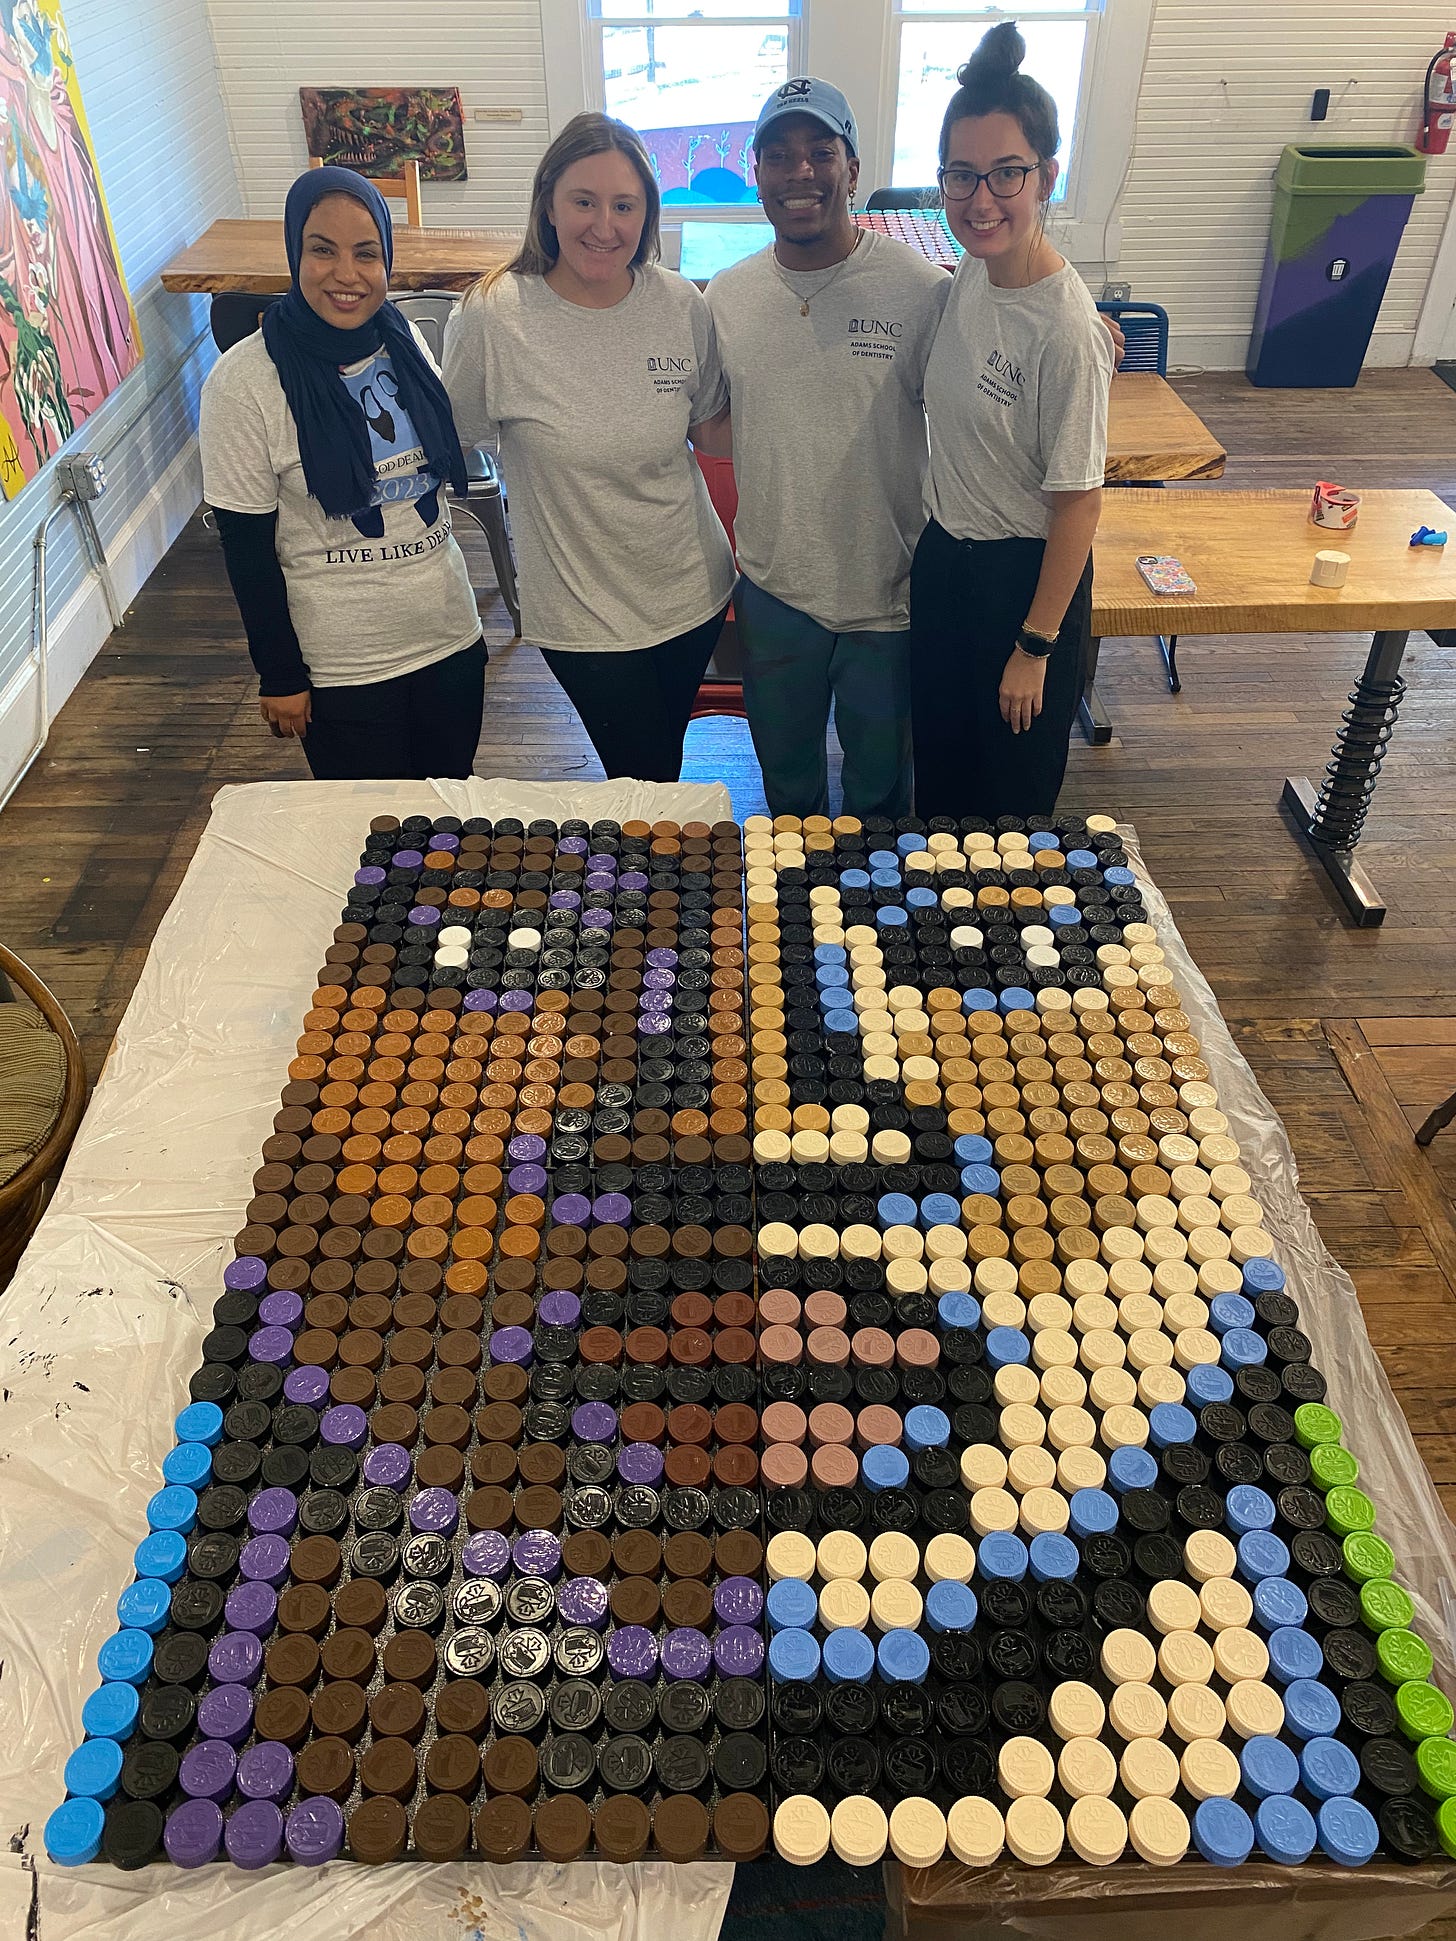 3 UNC students and 1 community member standing behind a two-tone face we created with spray painted pill bottle caps.